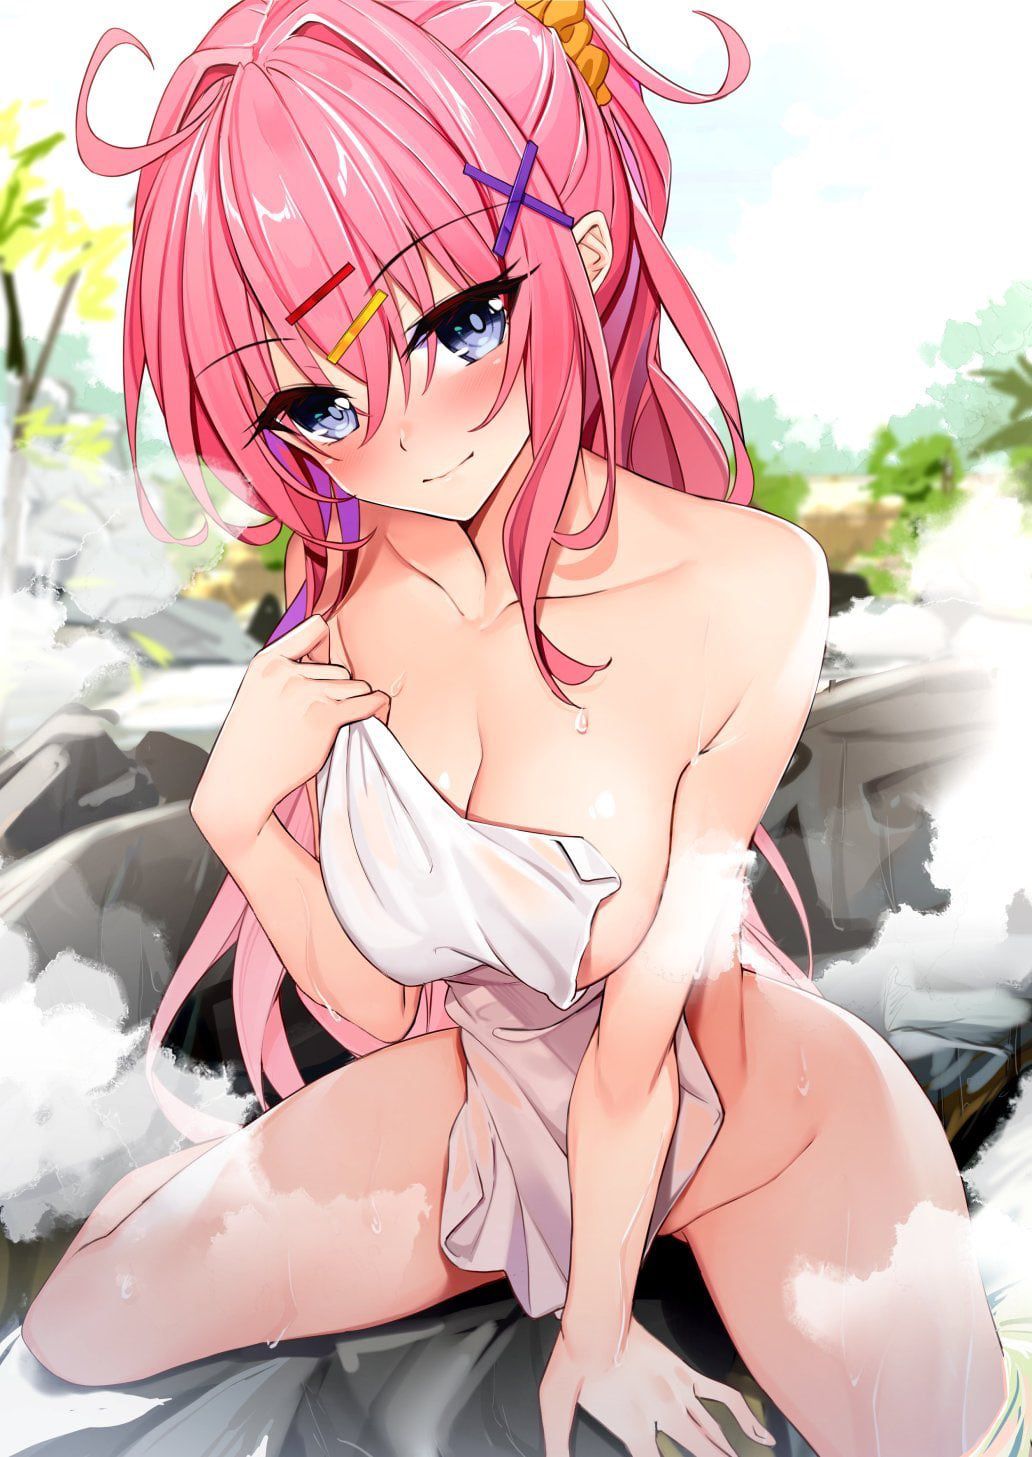 Let's gaze at the bath scene of a defenseless girl during relaxation time! 15